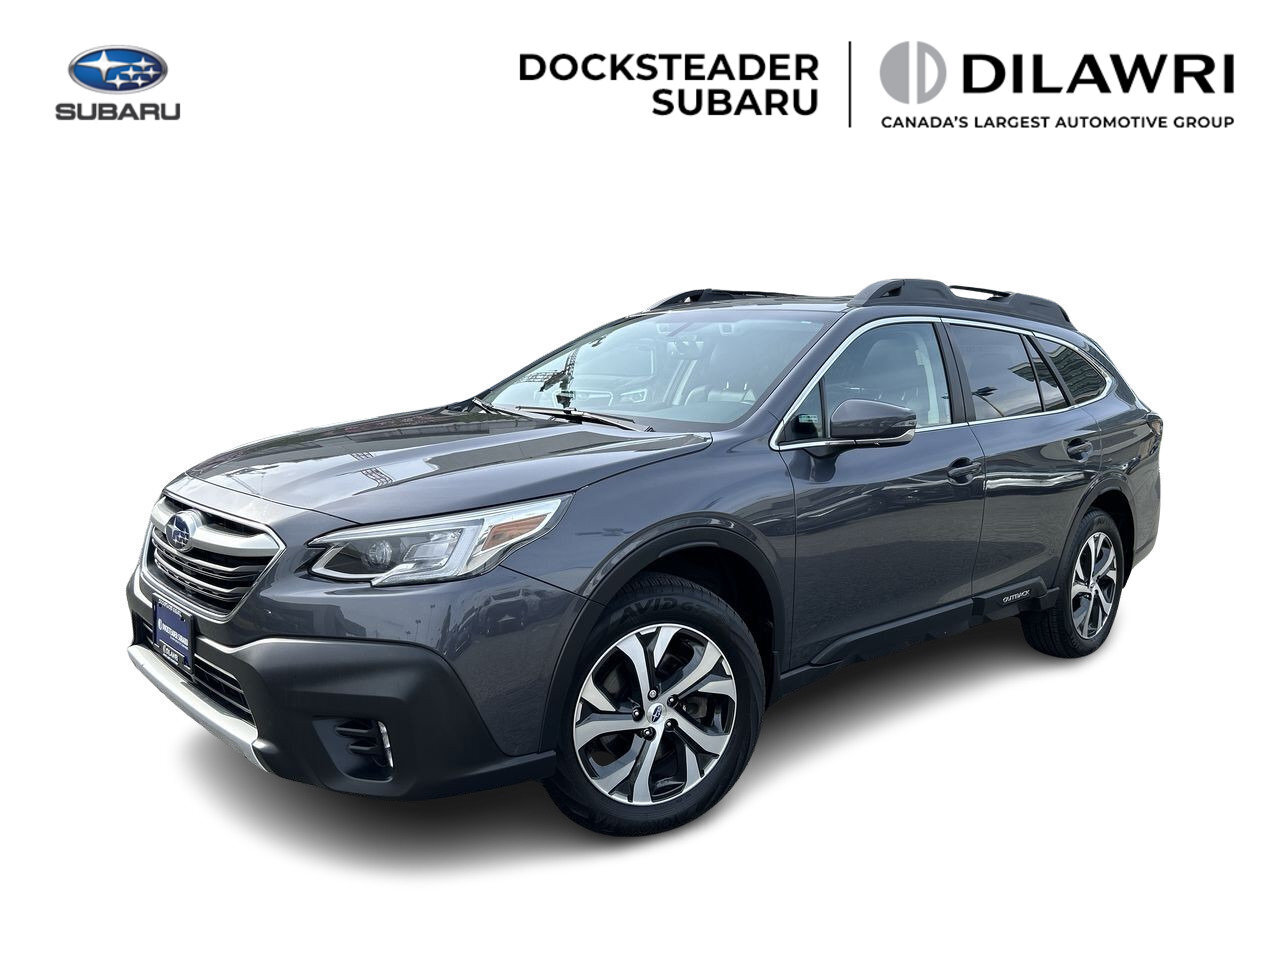 2020 Subaru Outback 2.4L Limited XT Turbo | Accident-Free / 